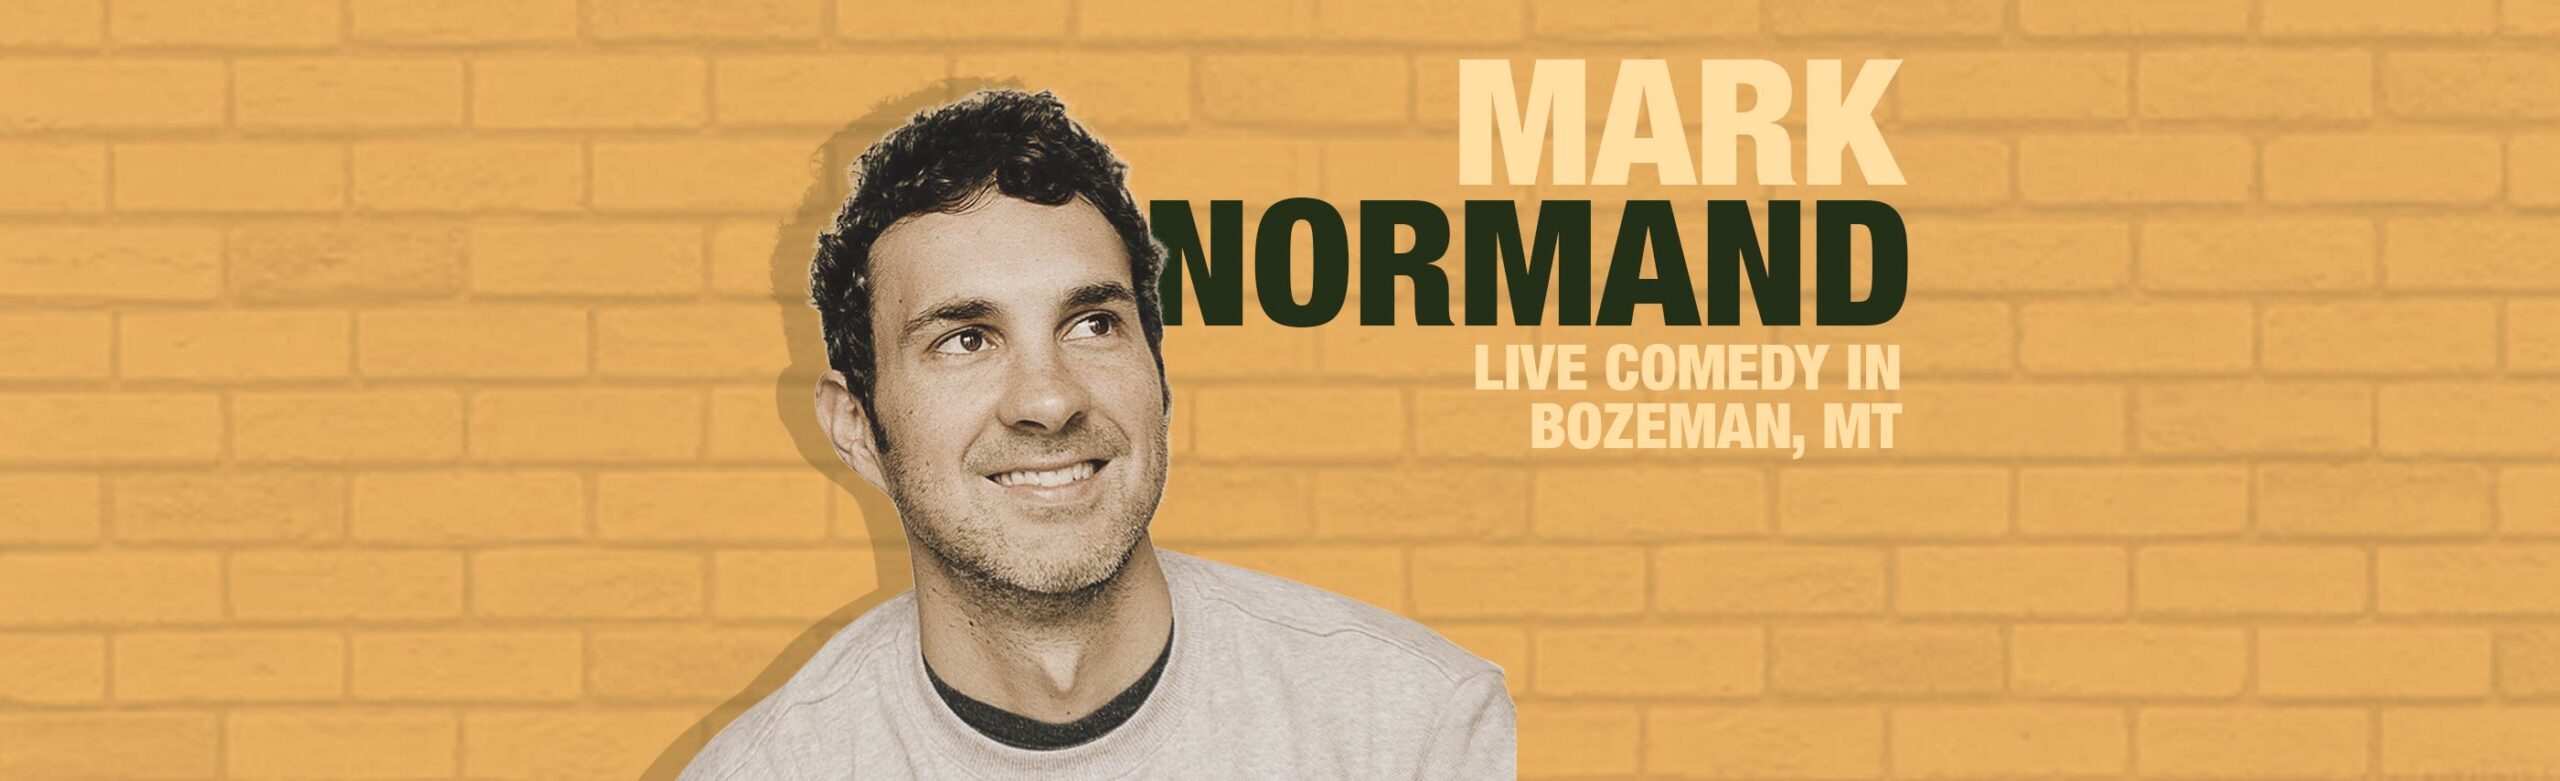 Mark Normand Adds Second Show at The ELM on 420 Image